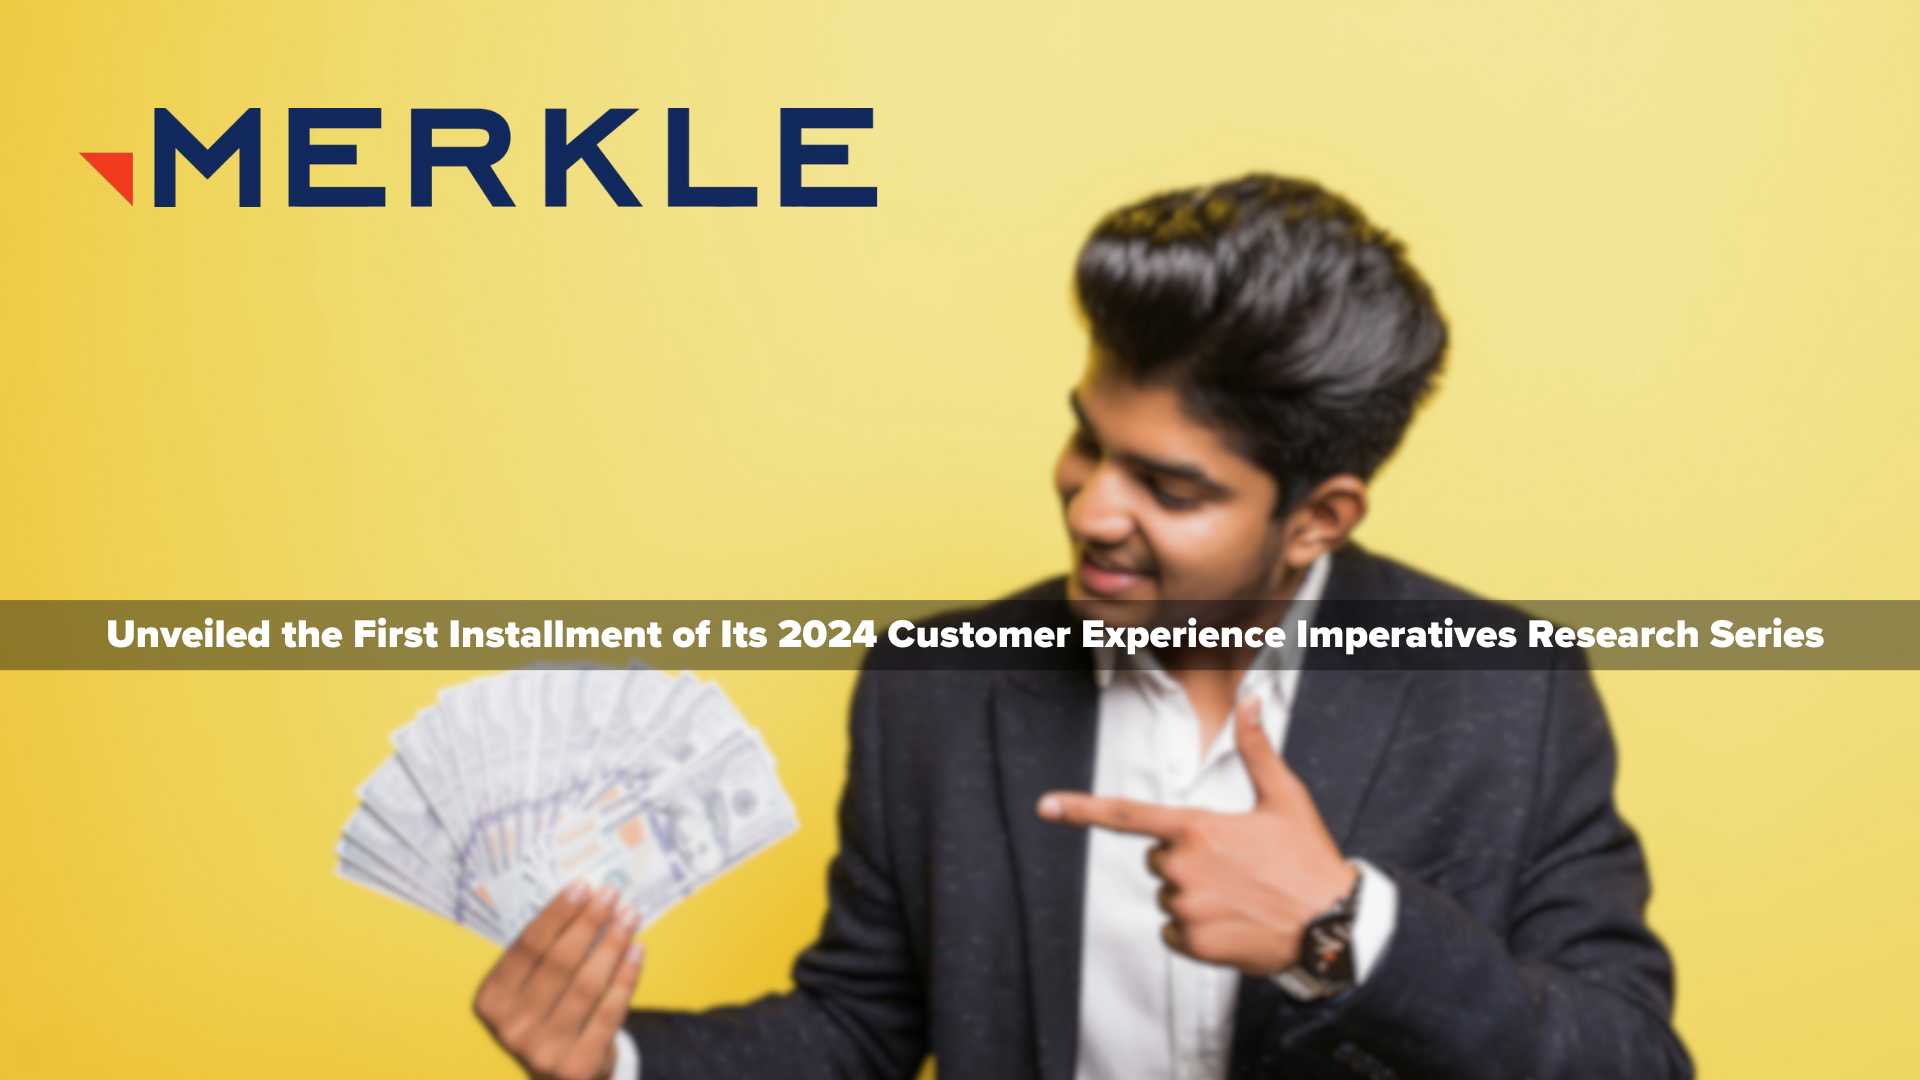 Brands Need to Embrace and Support Today's Customer Experience Economy, Findings Detailed in the 2024 Merkle Customer Experience Imperatives